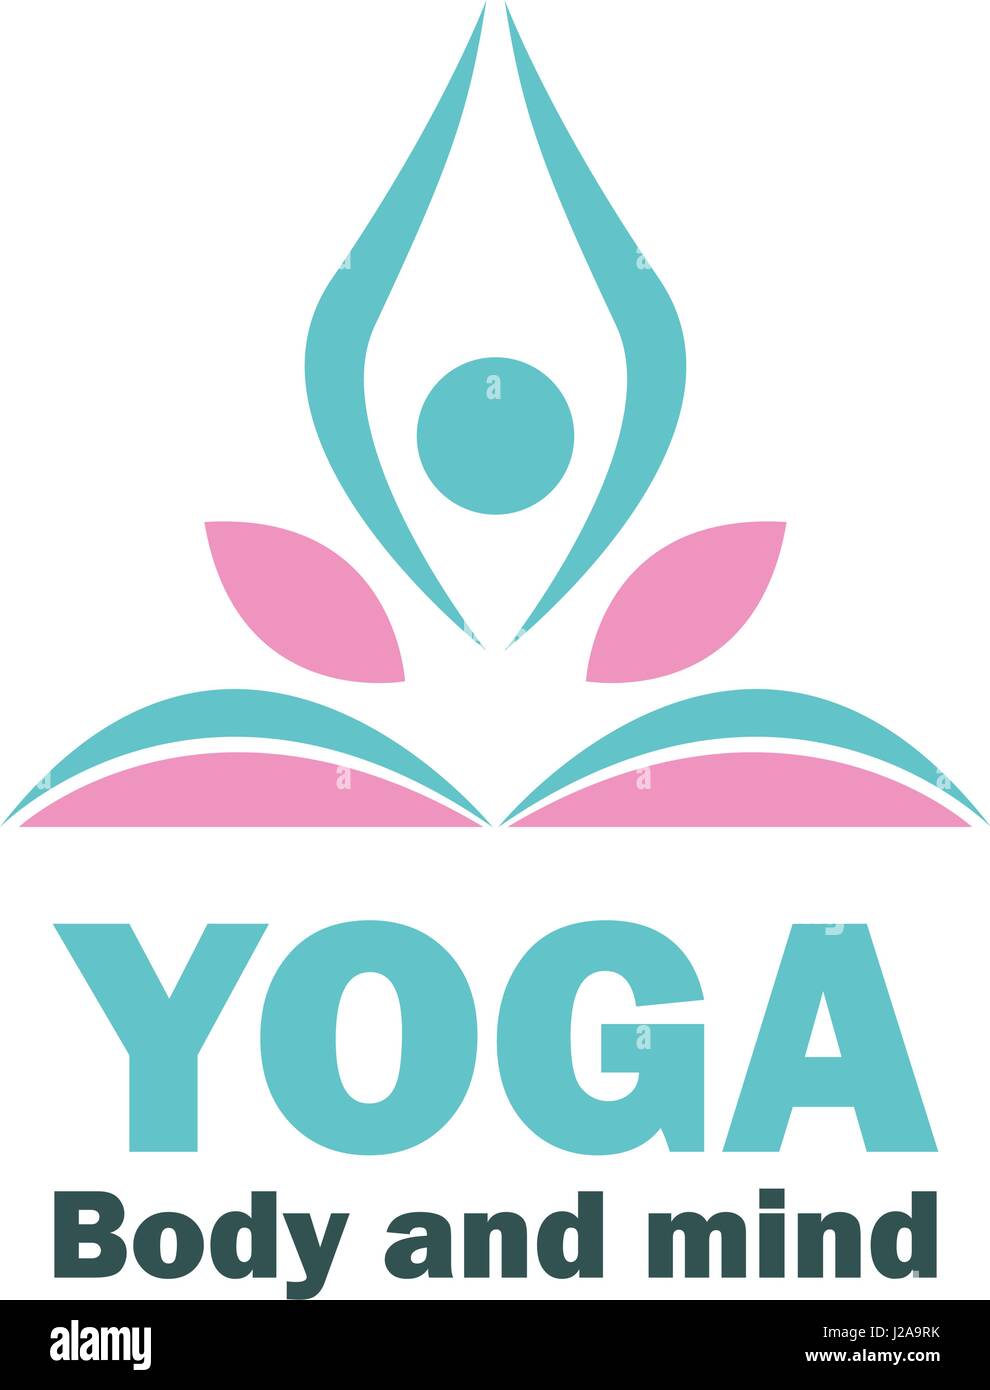 yoga body and mind meditation logo with text space for your slogan ...